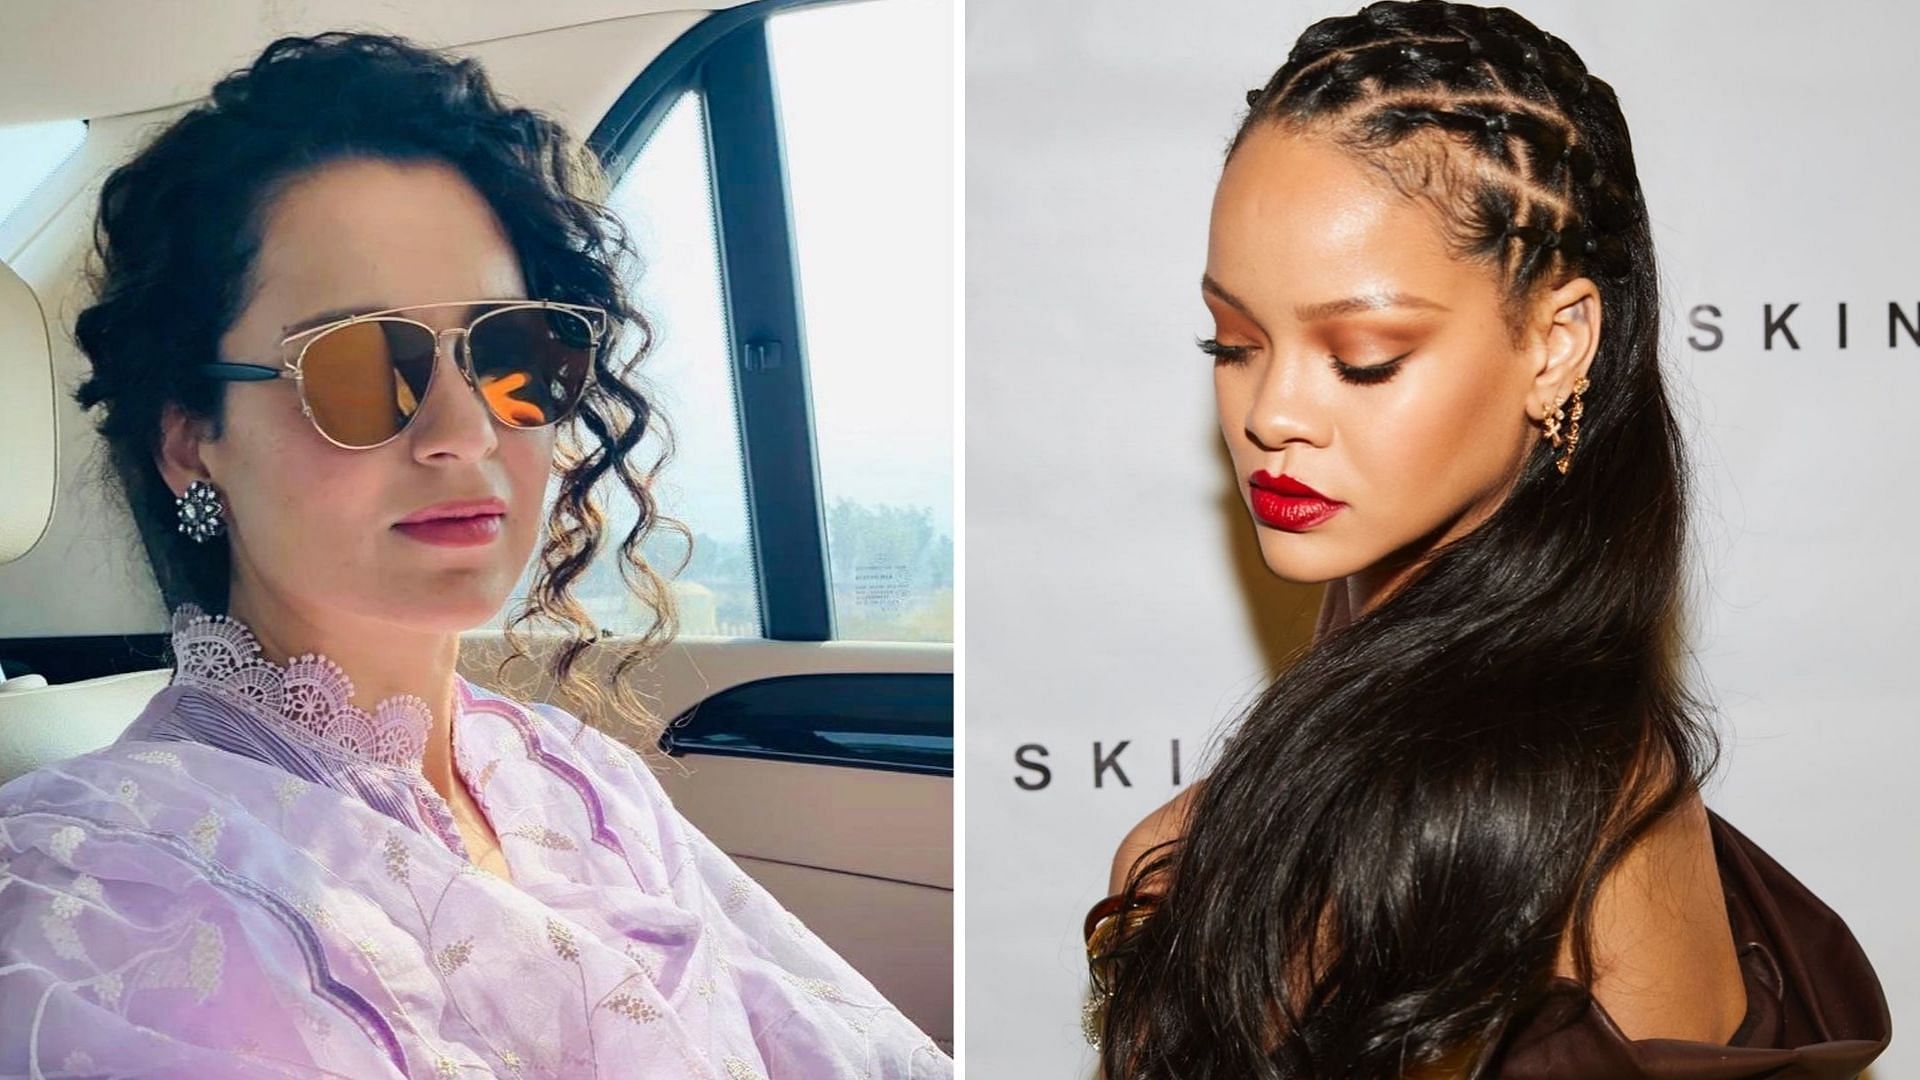 Kangana Ranaut has been called out for her tweet on Rihanna backing farmers' protests.